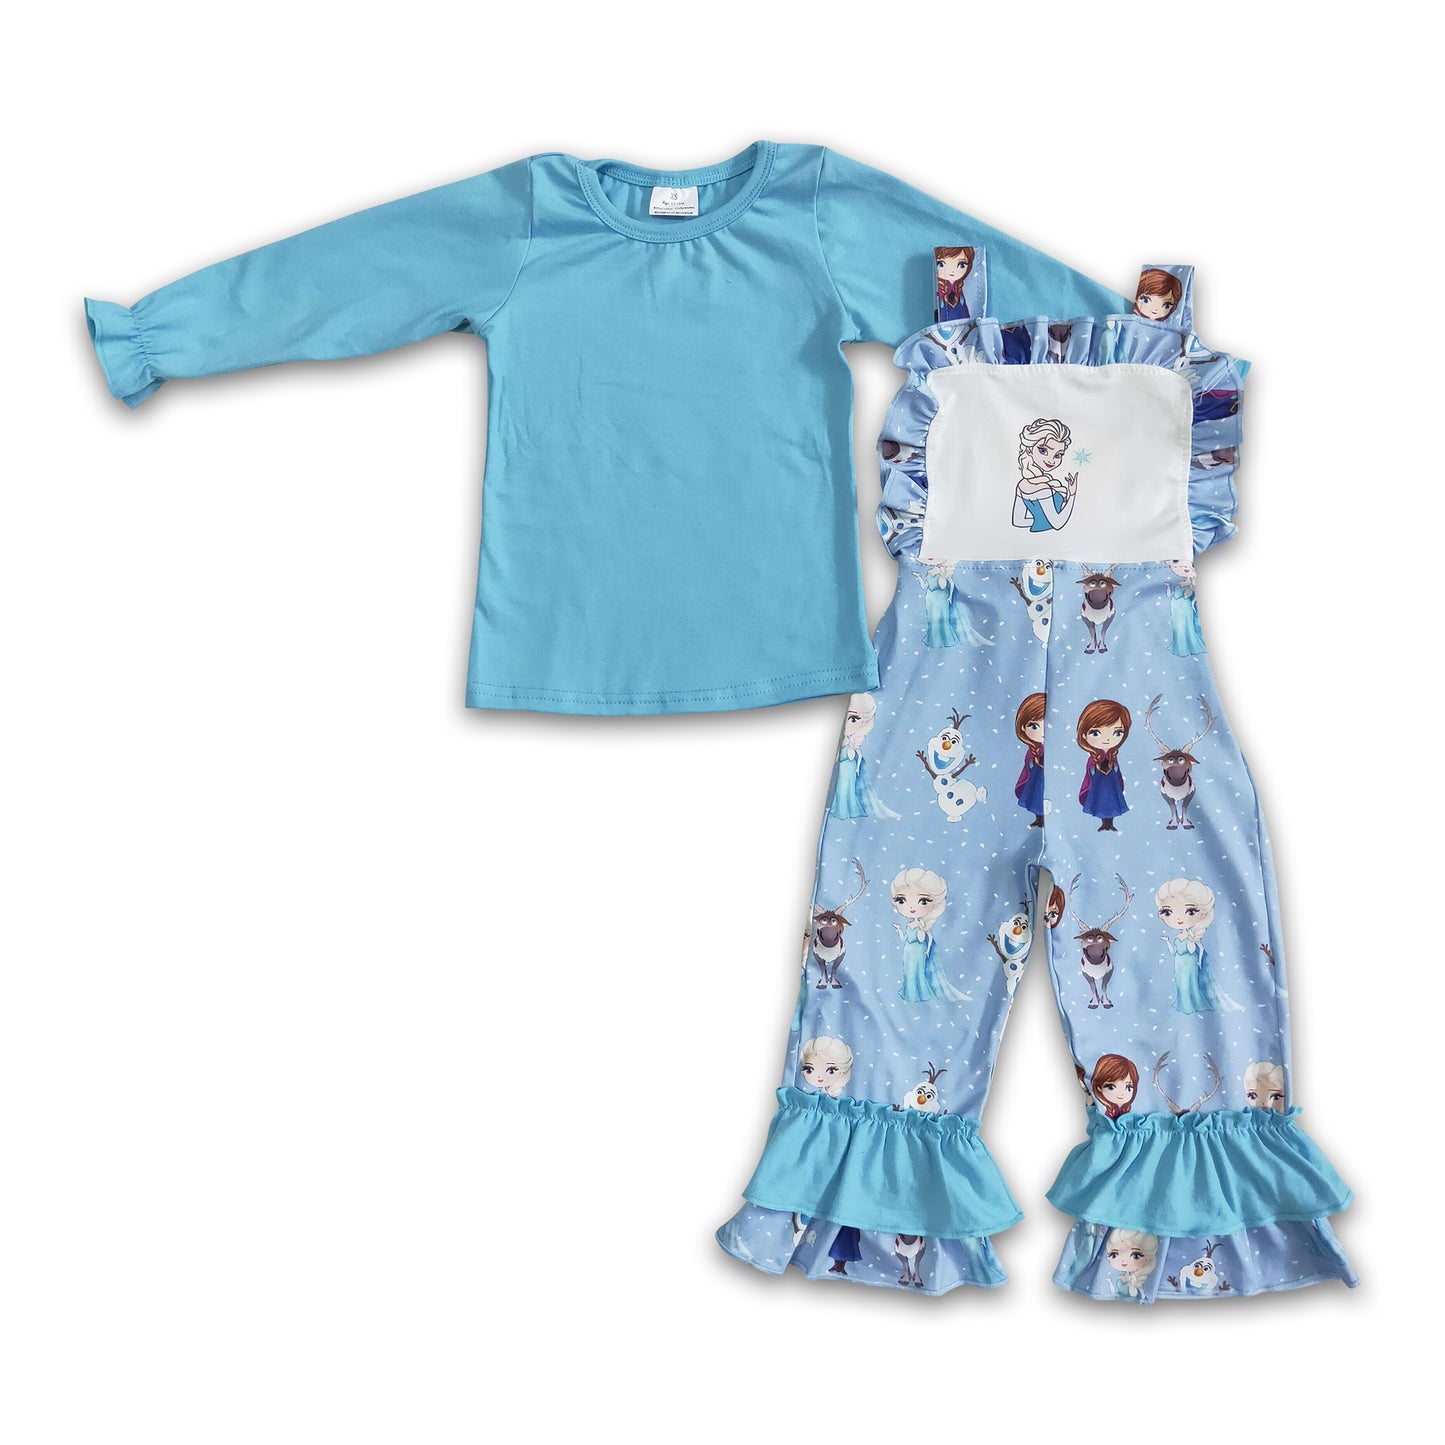 Blue cotton shirt ice overalls girls boutique clothing